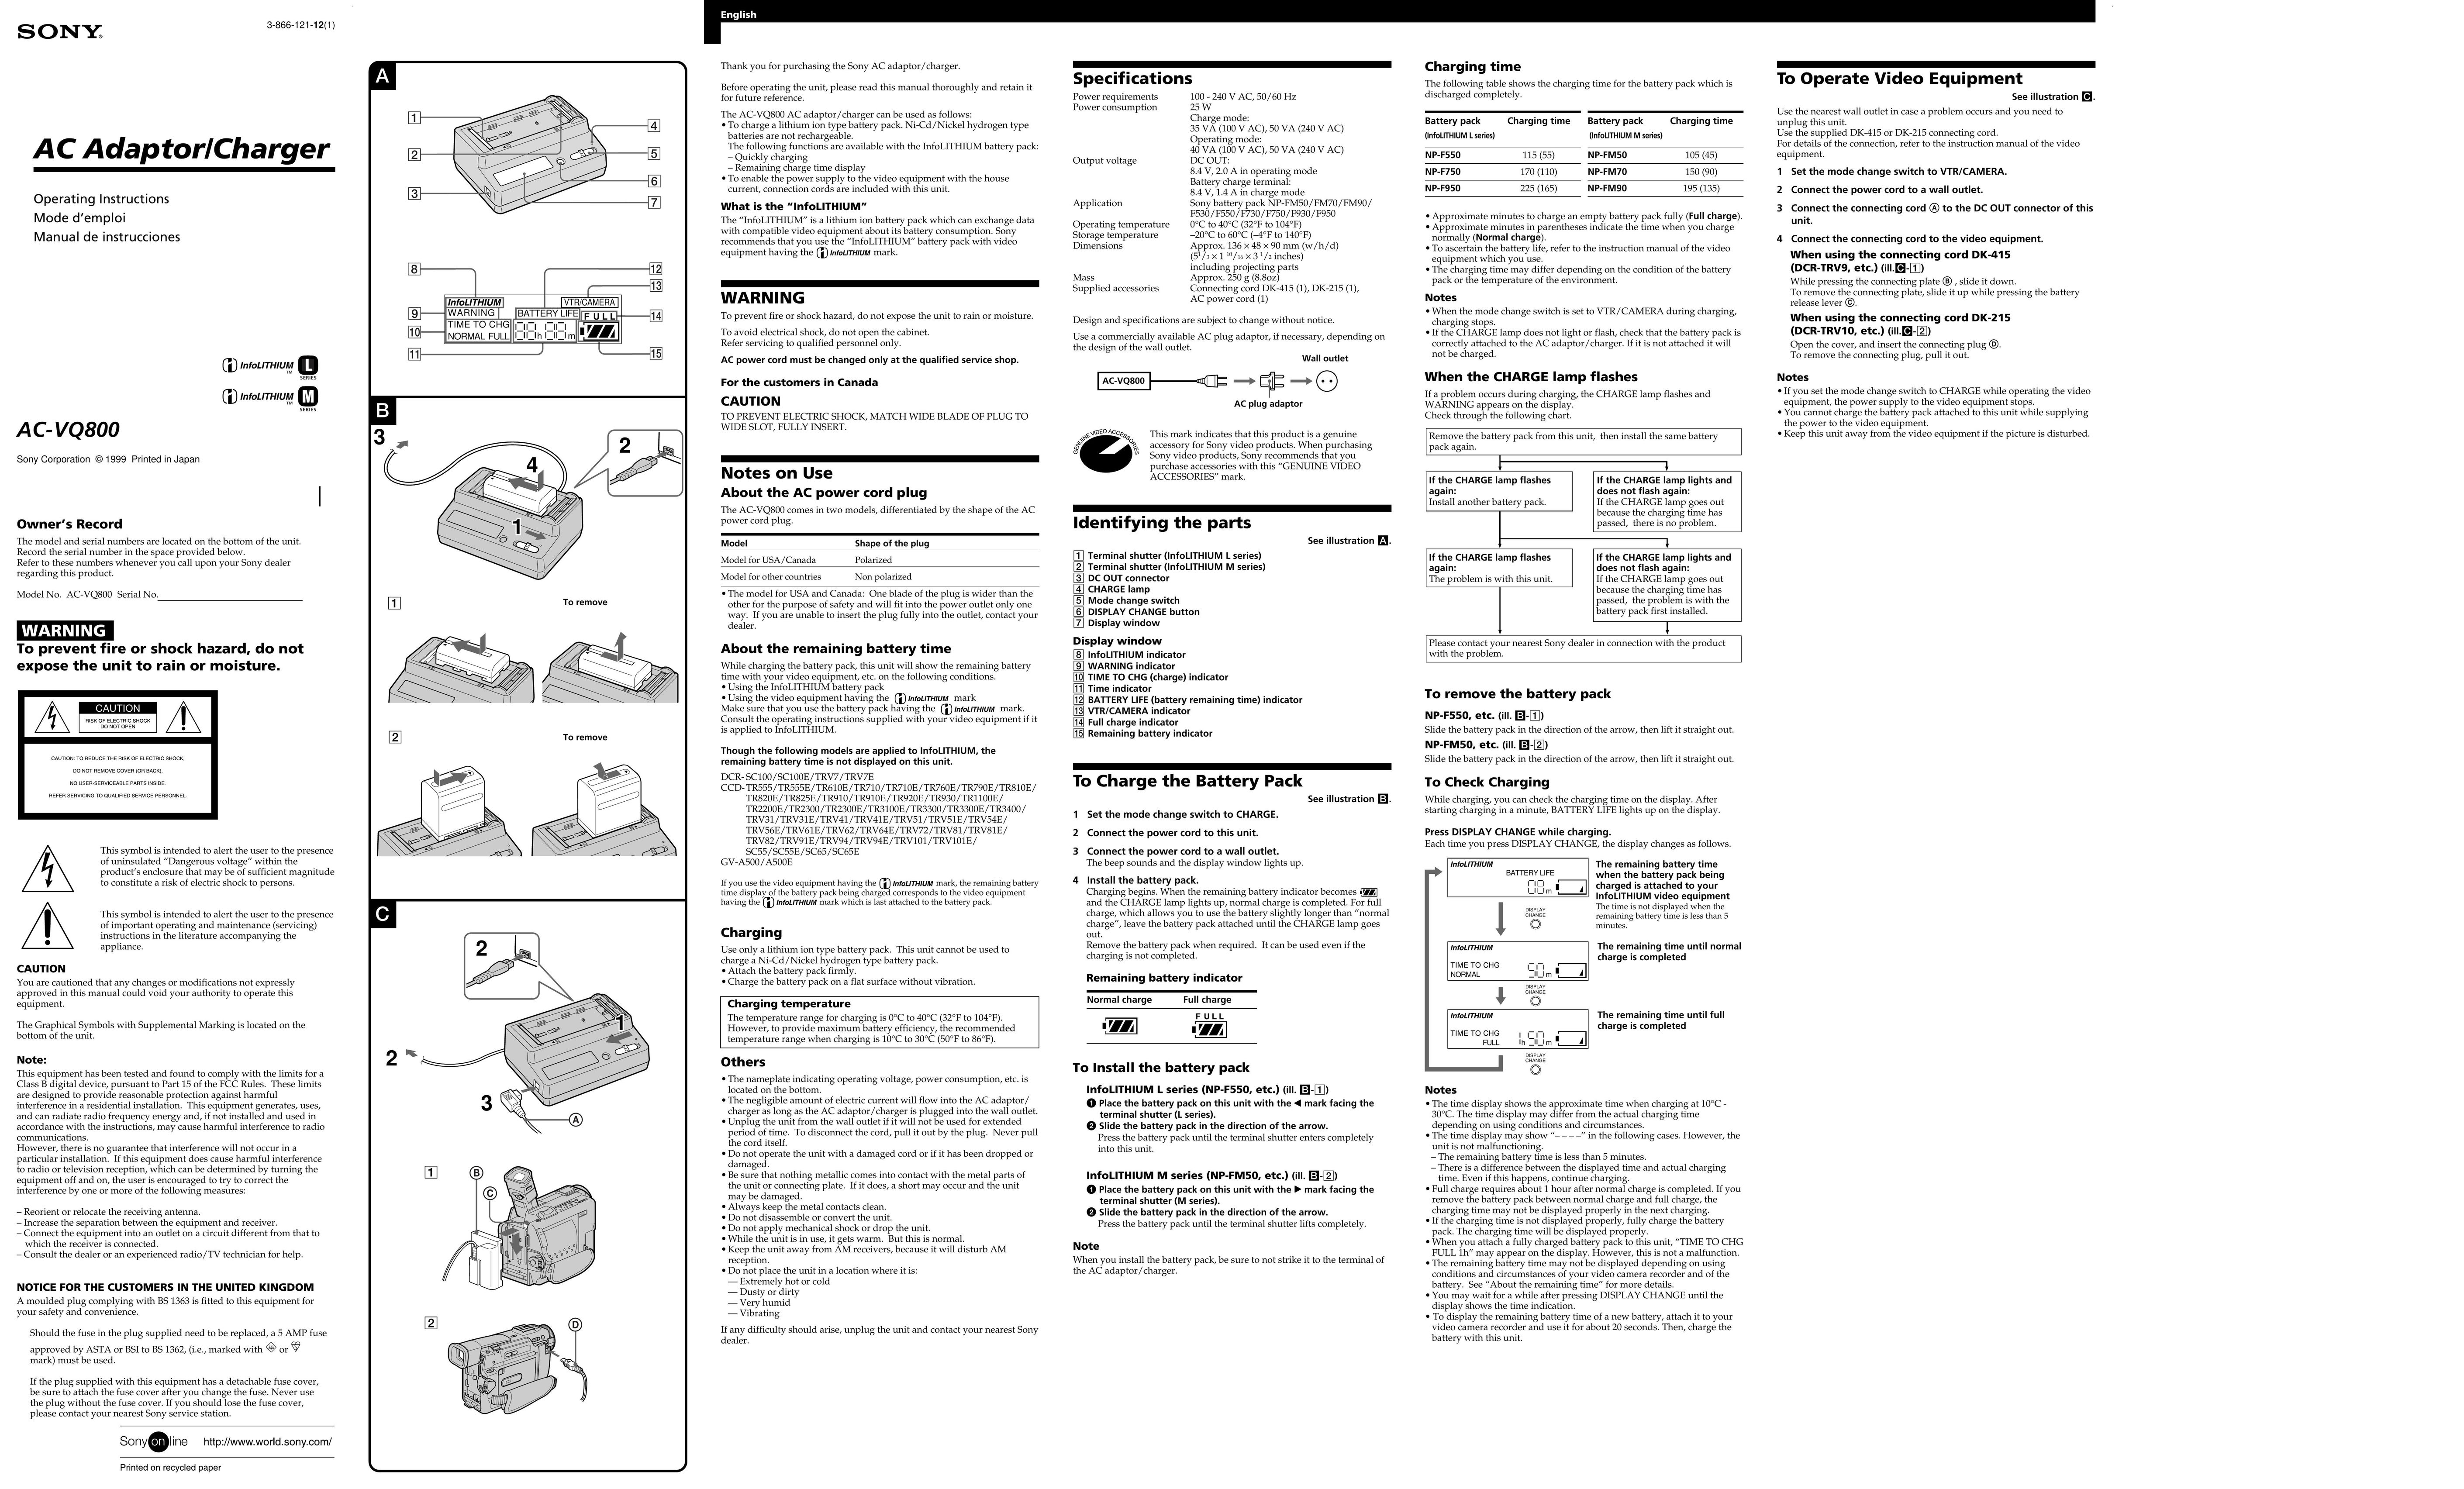 Sony AC VQ800 Battery Charger User Manual